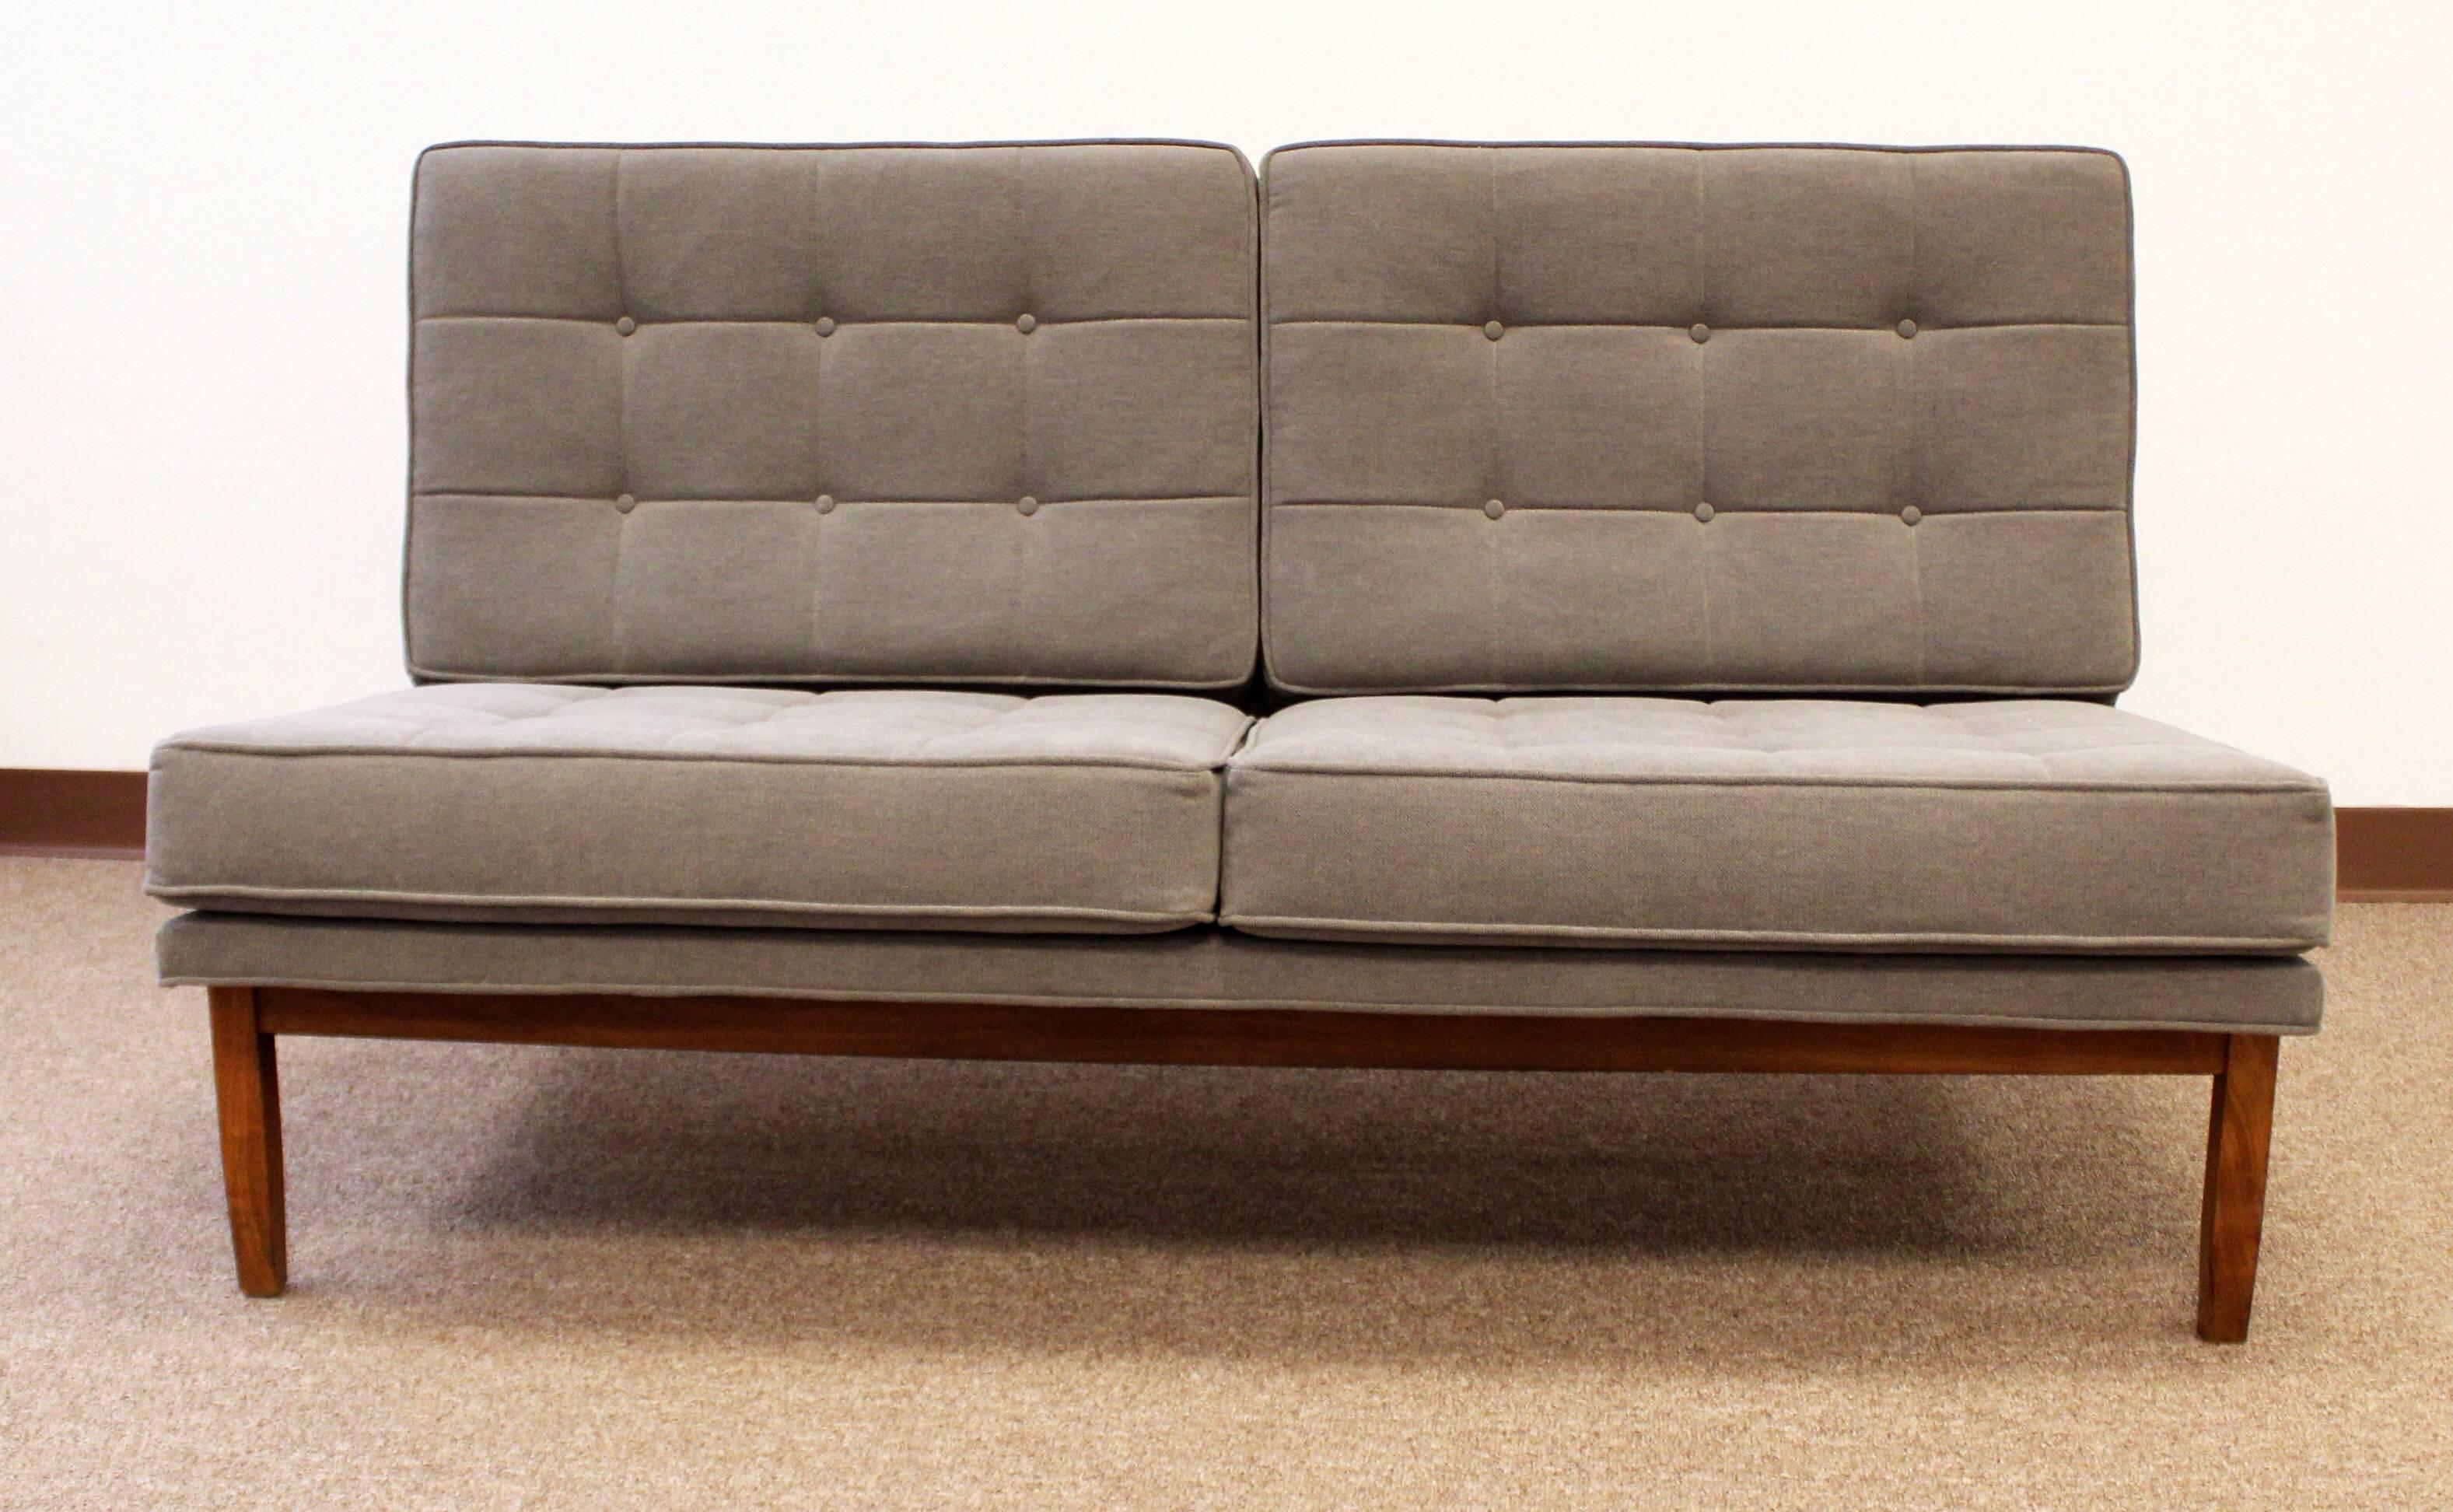 Great seating in this rare Knoll settee and chair. Reupholstered in a gray nuby fabric. Solid walnut frames.